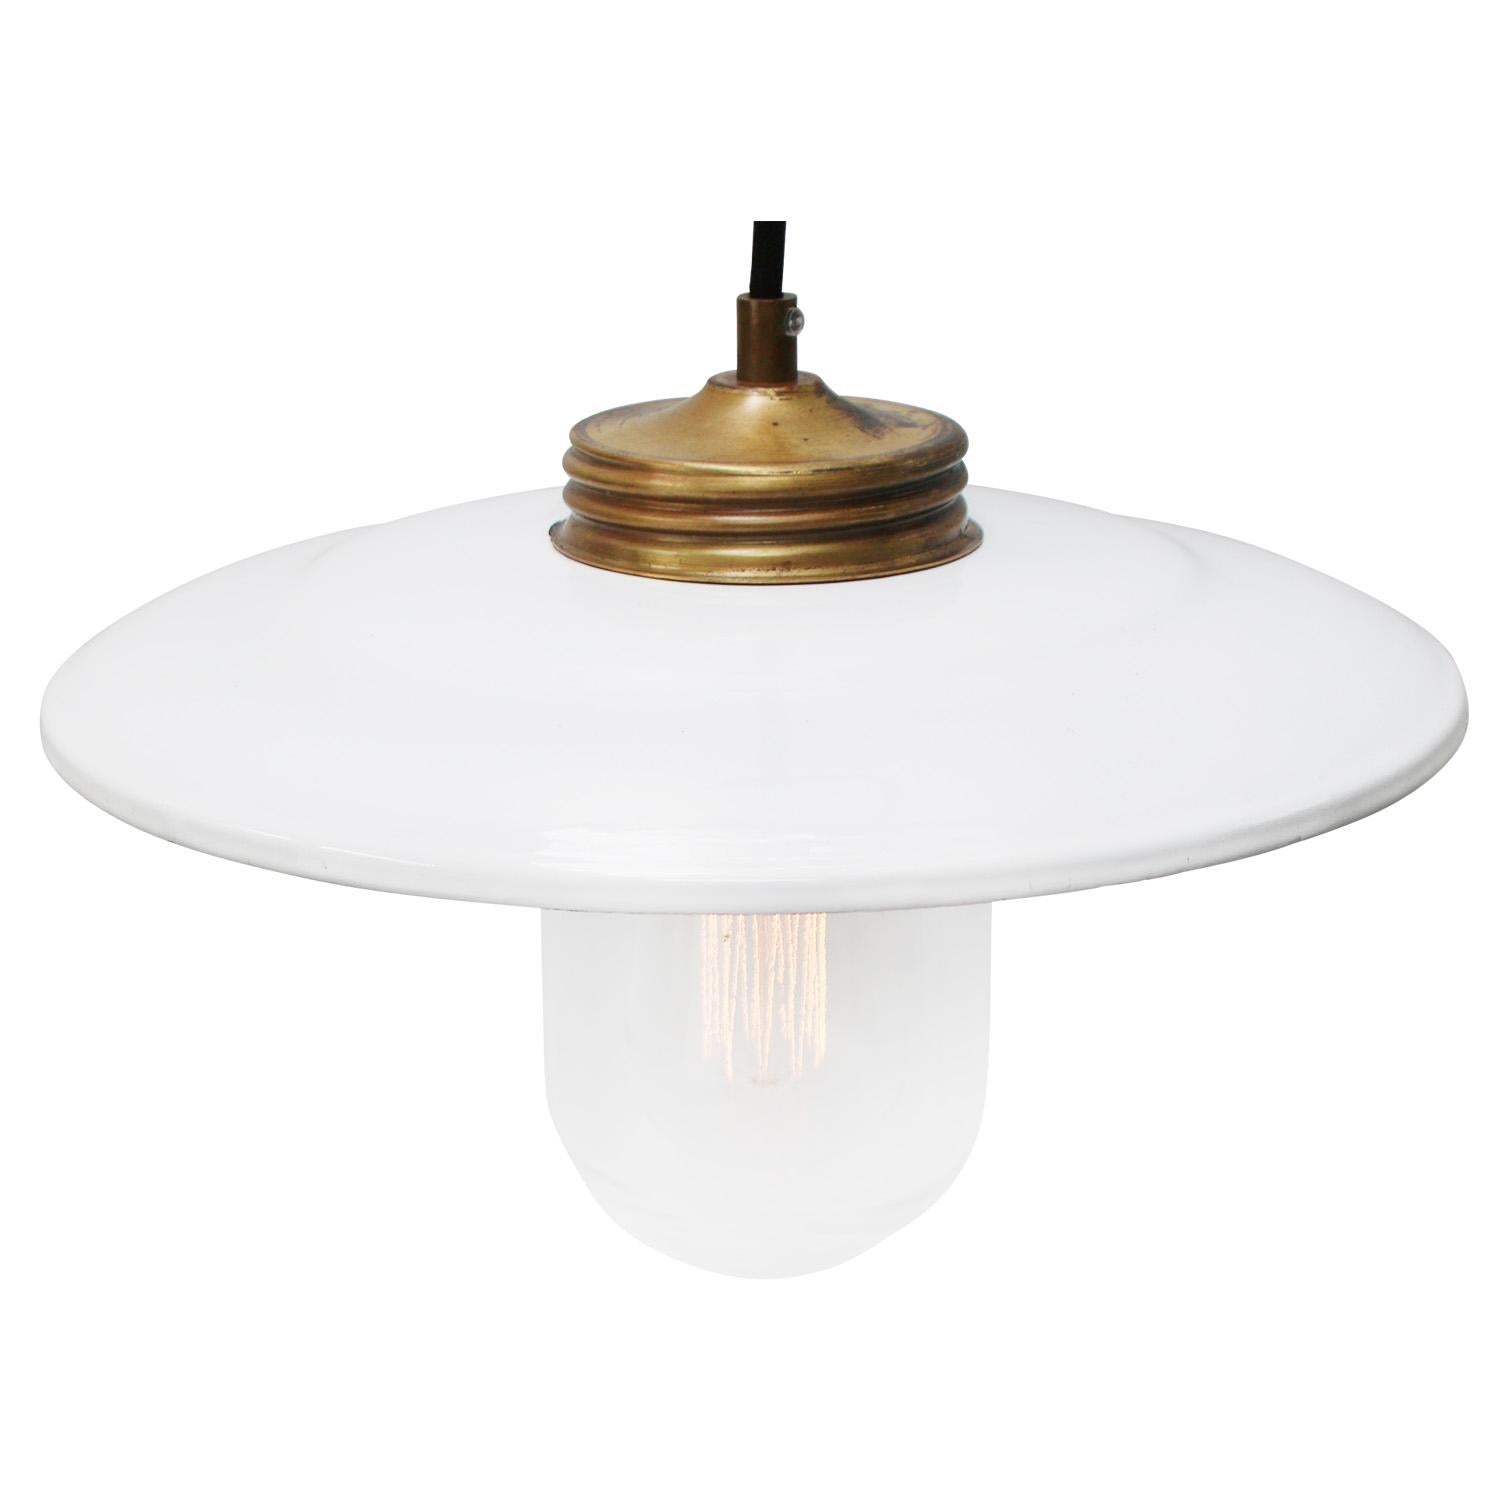 White enamel Industrial hanging lamp.
Clear glass with brass top.

Weight: 1.30 kg / 2.9 lb

Priced per individual item. All lamps have been made suitable by international standards for incandescent light bulbs, energy-efficient and LED bulbs.